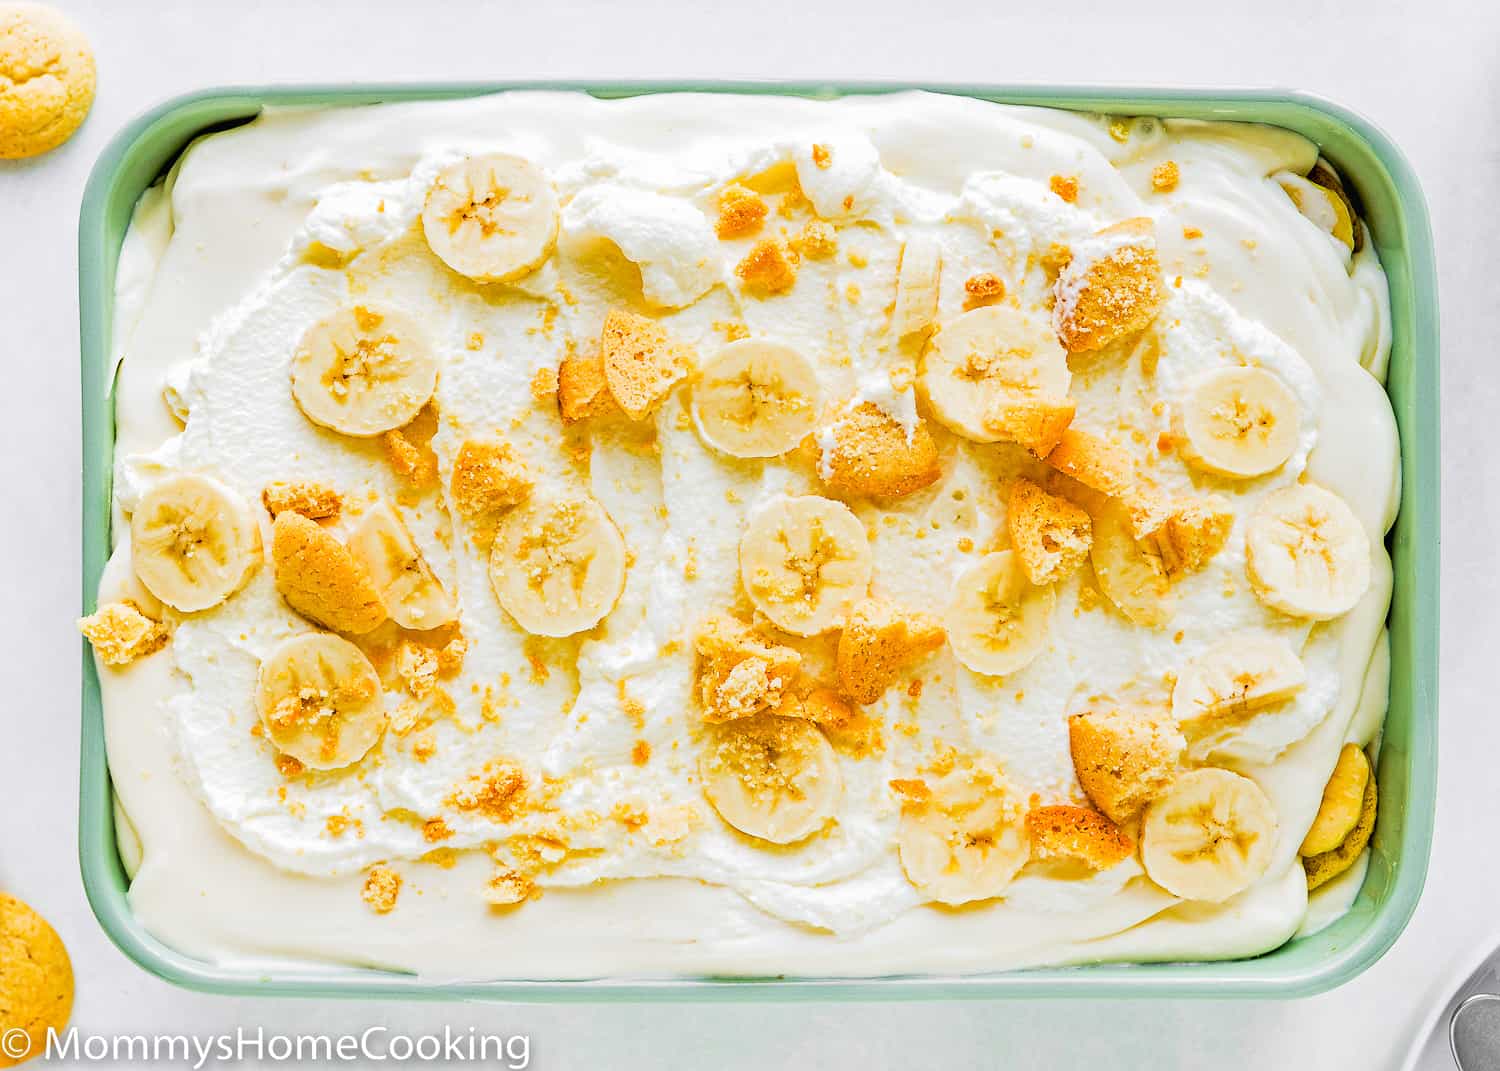 Homemade eggless banana pudding with whipped cream, crumbled wafers, and sliced bananas on top.